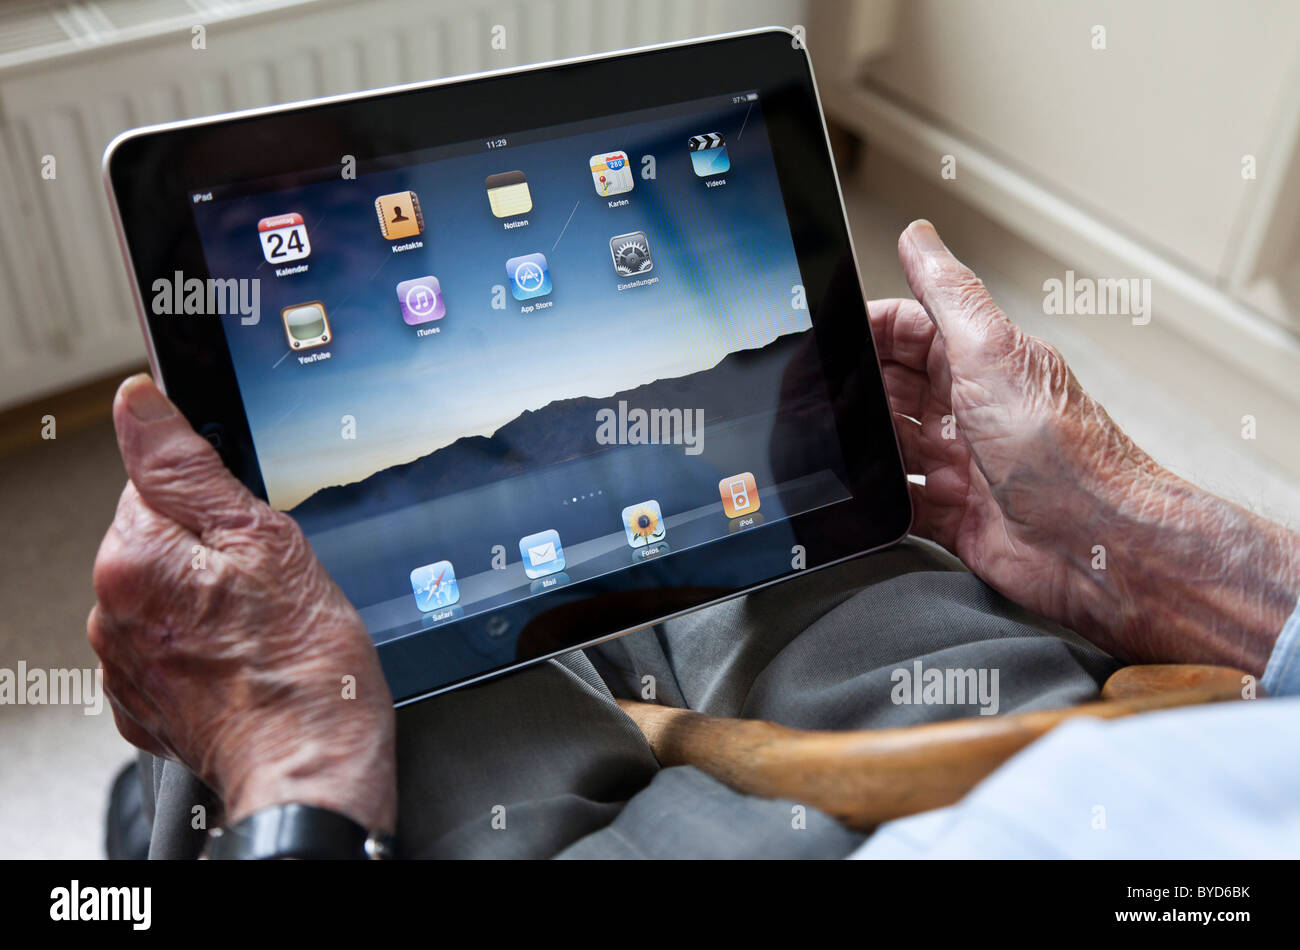 Senior viewing the user interface on an iPad, close-up of his hands Stock Photo